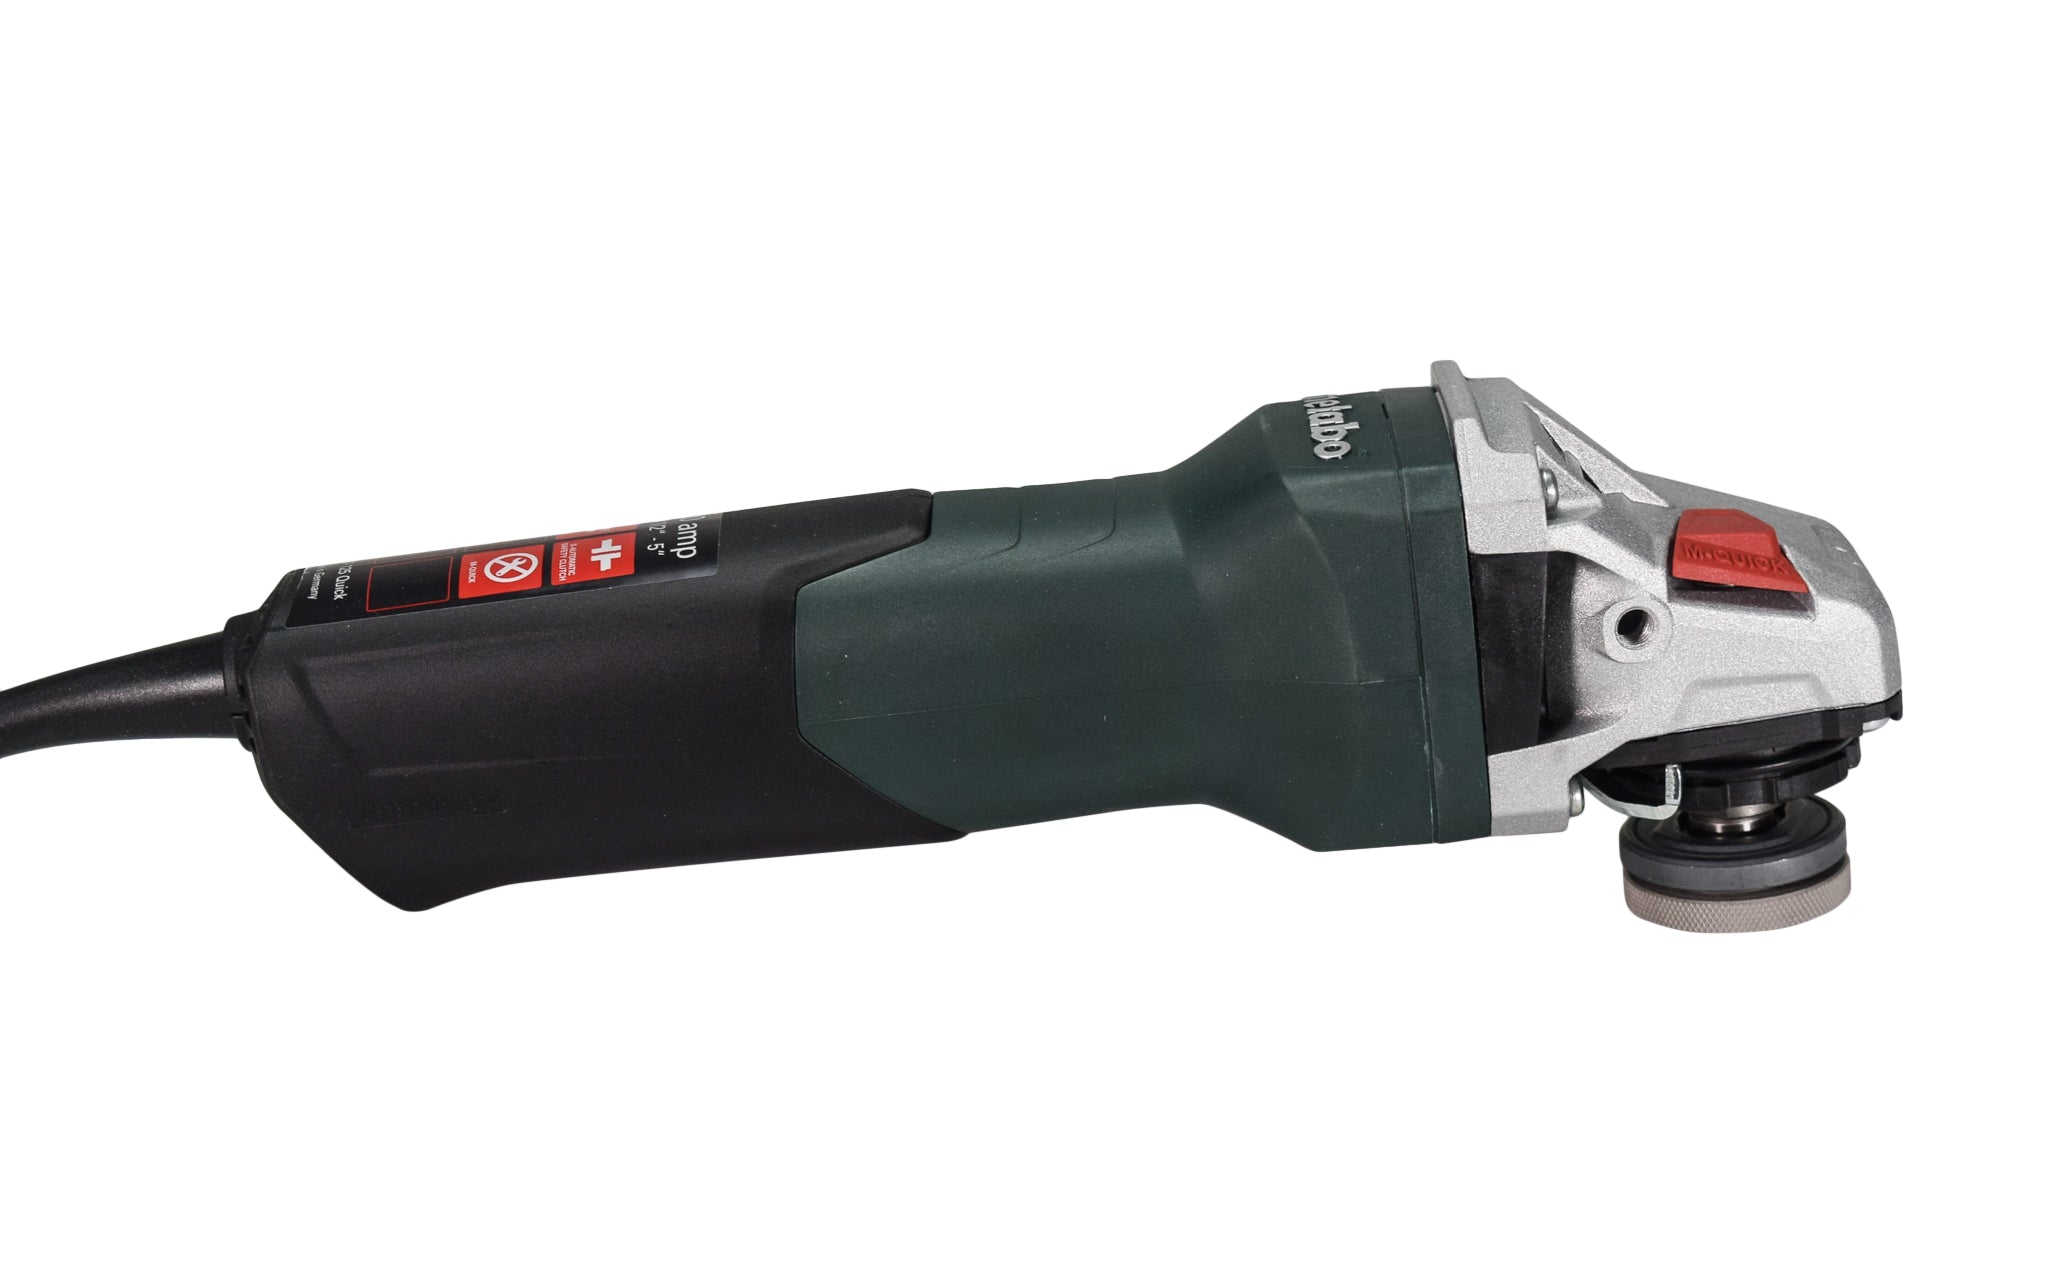 Metabo 603623420 4.5-inch/5-inch Angle Grinder 11,000 Rpm - 11.0 Amps with Lock-on